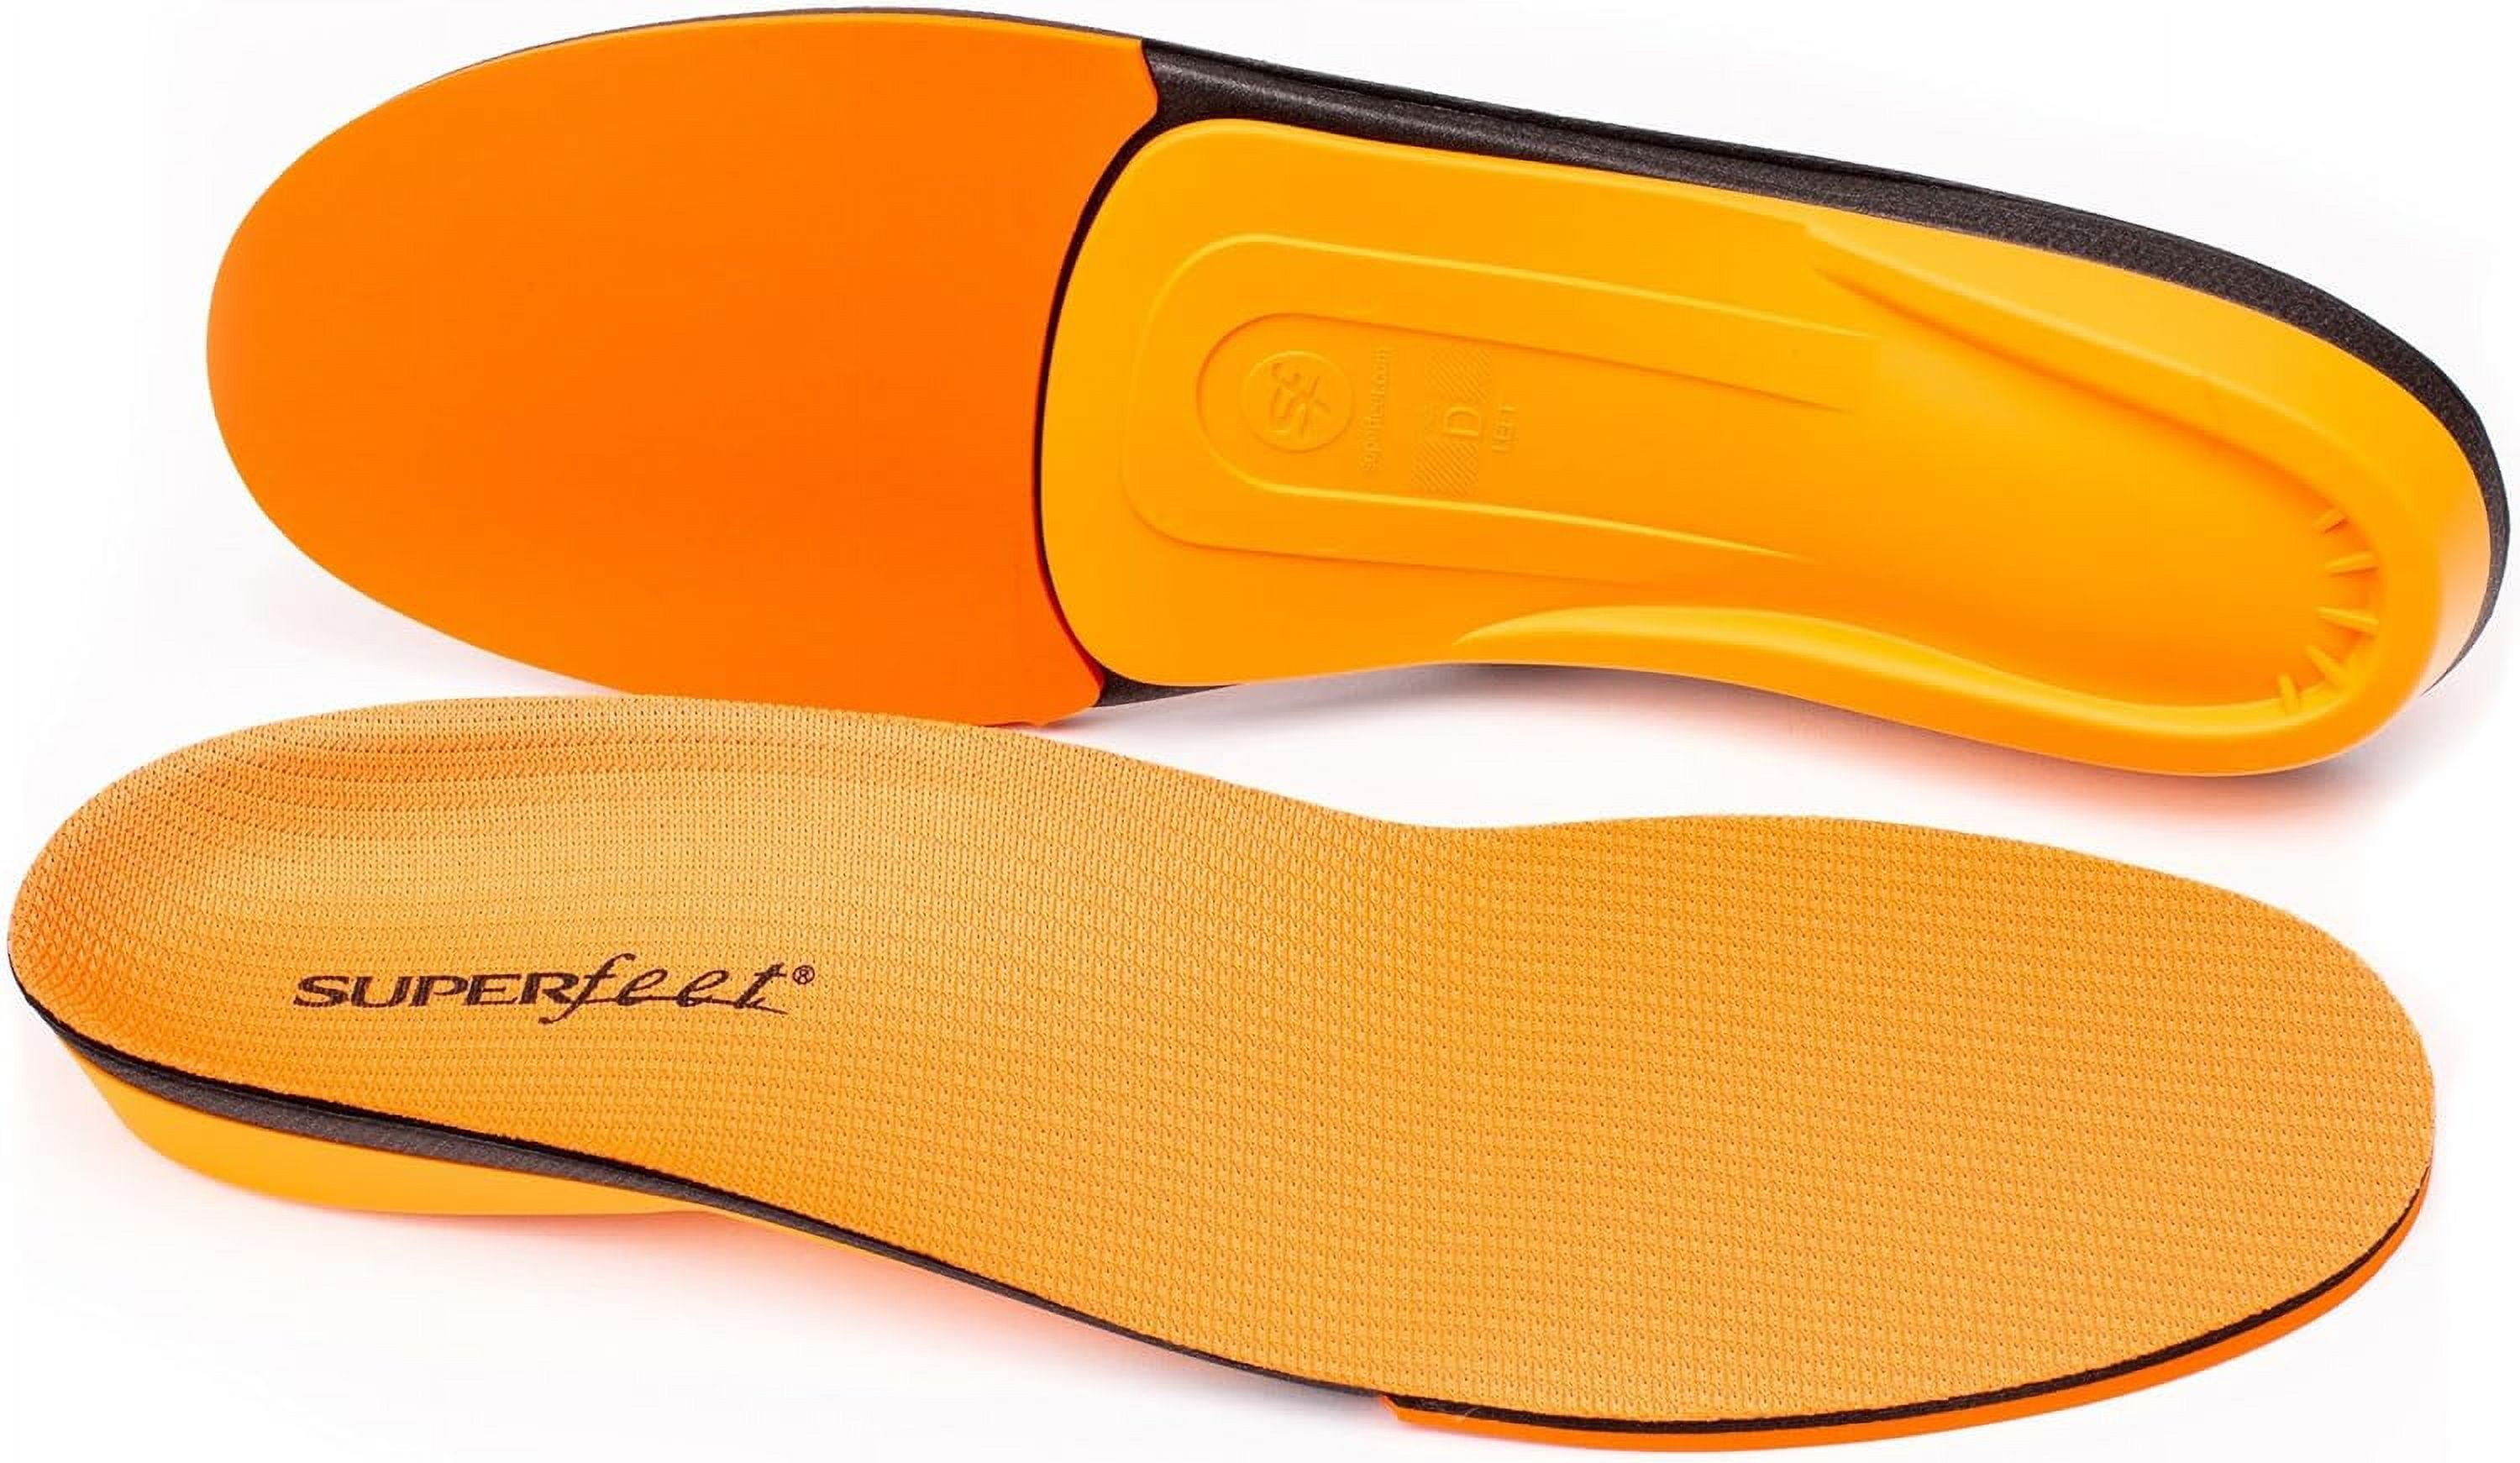 Superfeet All-Purpose High Impact Support Insoles (Orange) - Trim-To-Fit  Orthotic Arch Support Shoe Inserts - Professional Grade - Men 13.5-15